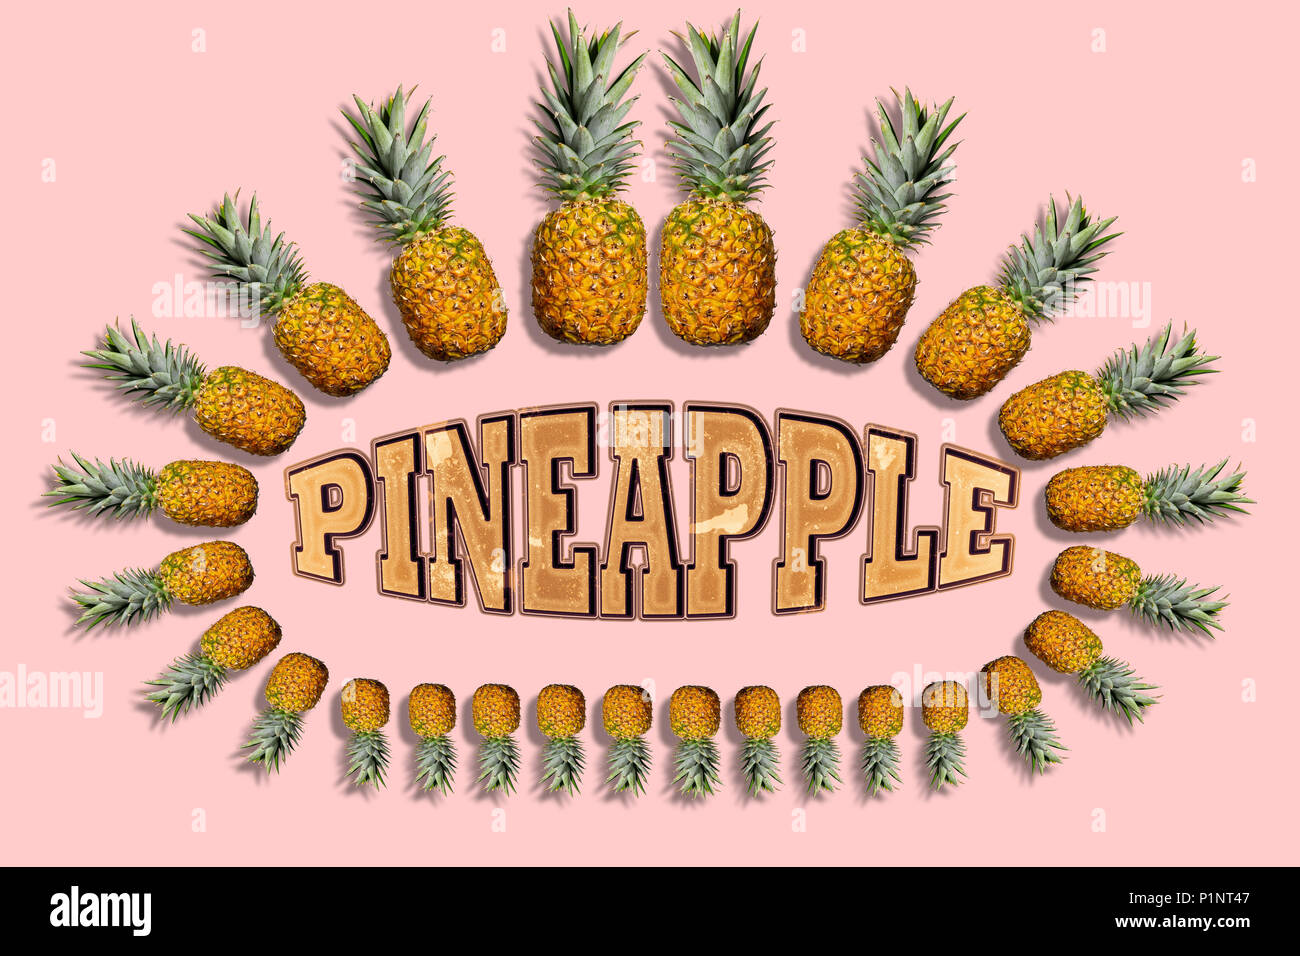 Pineapple photomontage with whole pineapples and drop shadow of varying size surrounding text 'Pineapple' on light pink background. Stock Photo